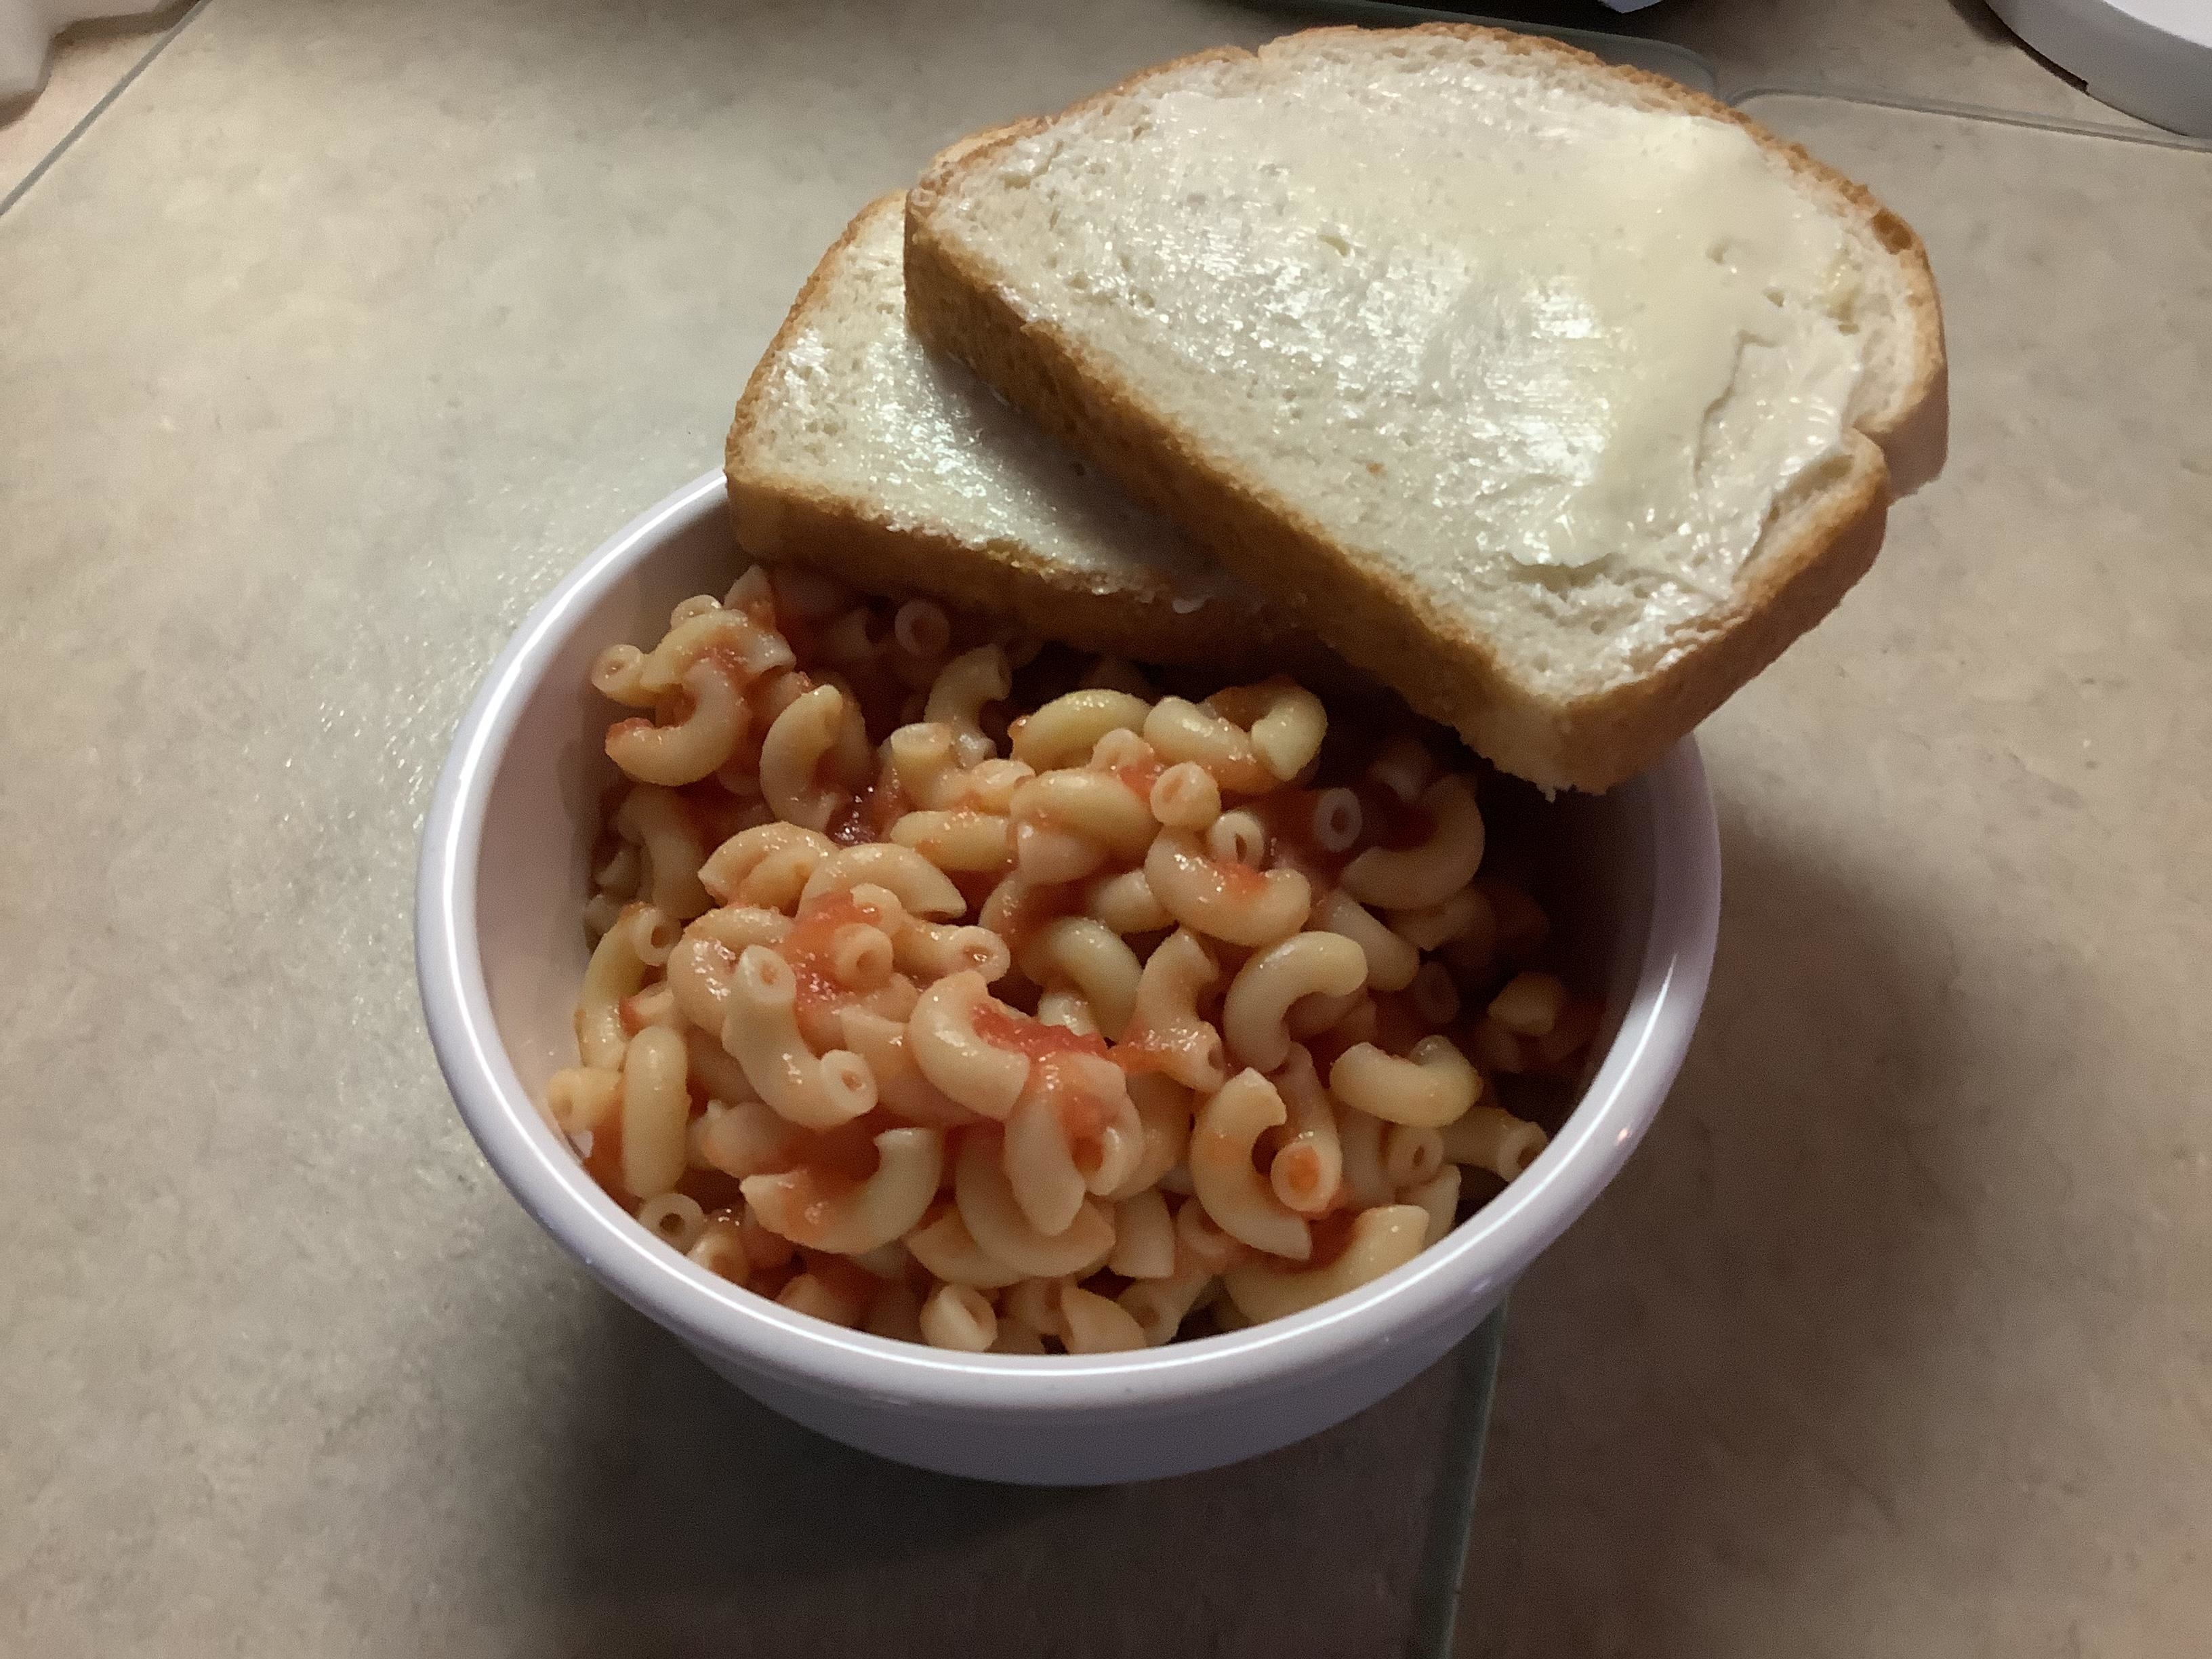 A bowl of pasta with a slice of buttered bread on top